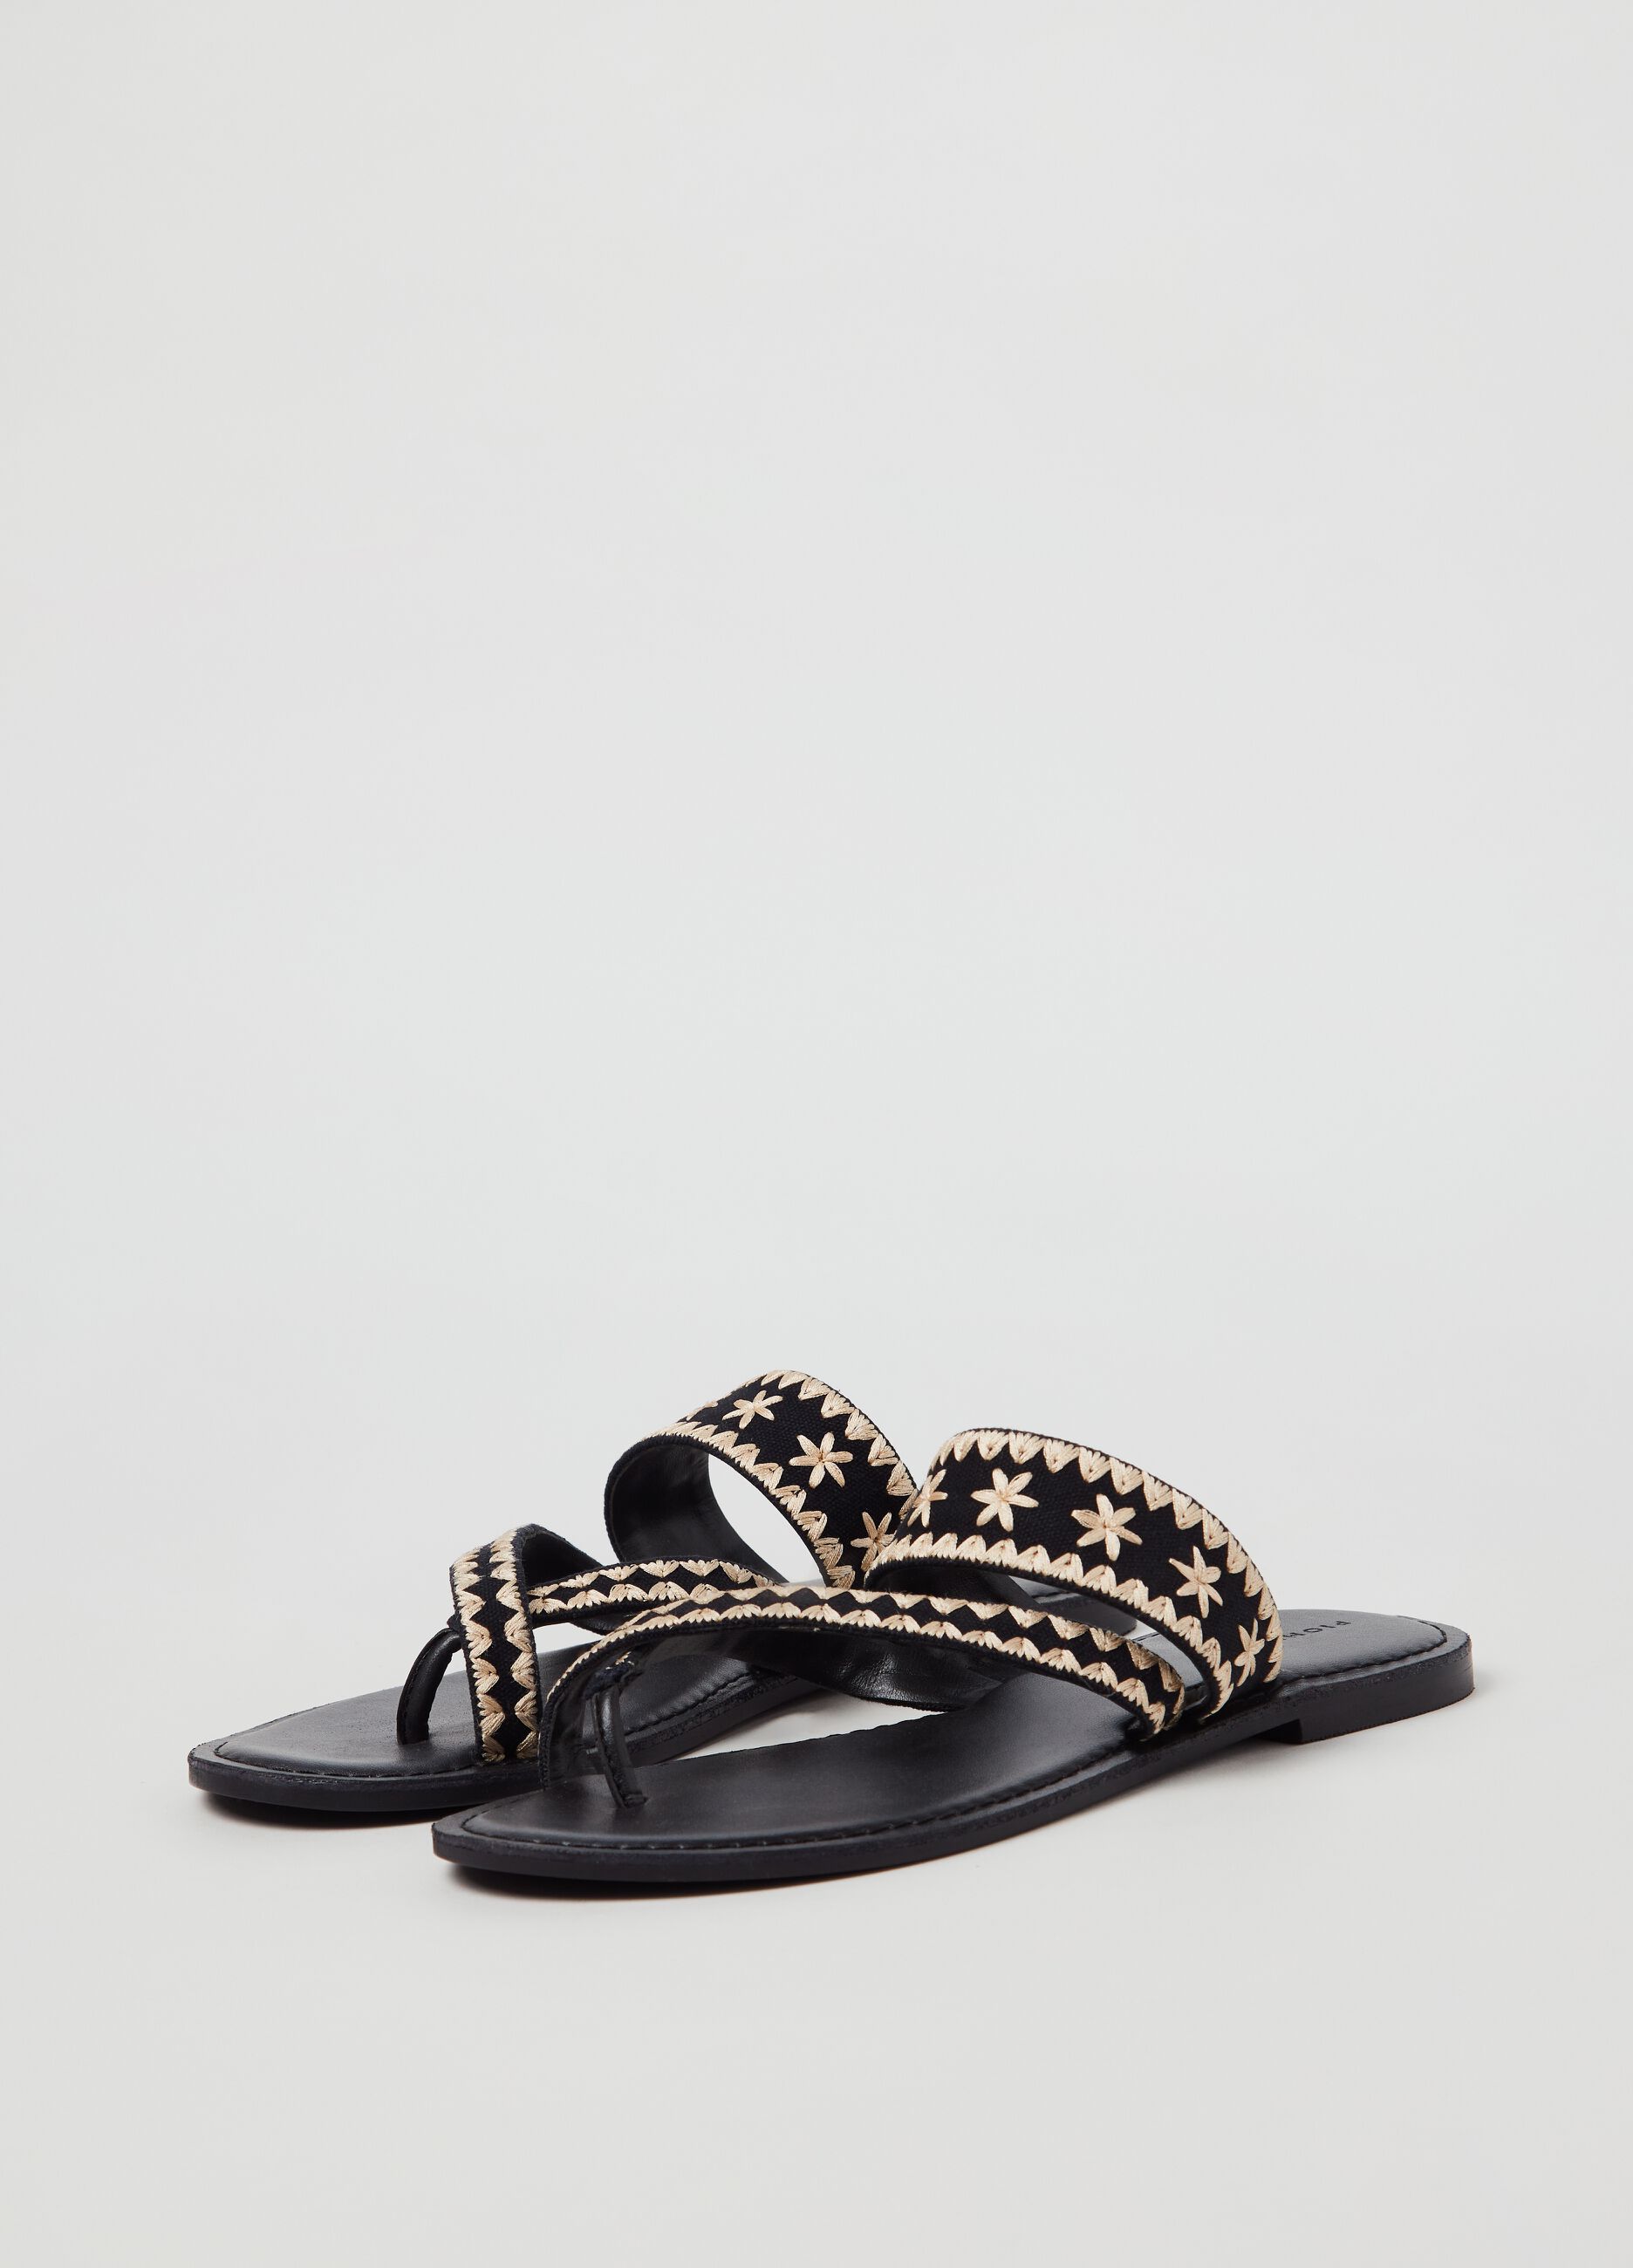 Sandal with traditional motif